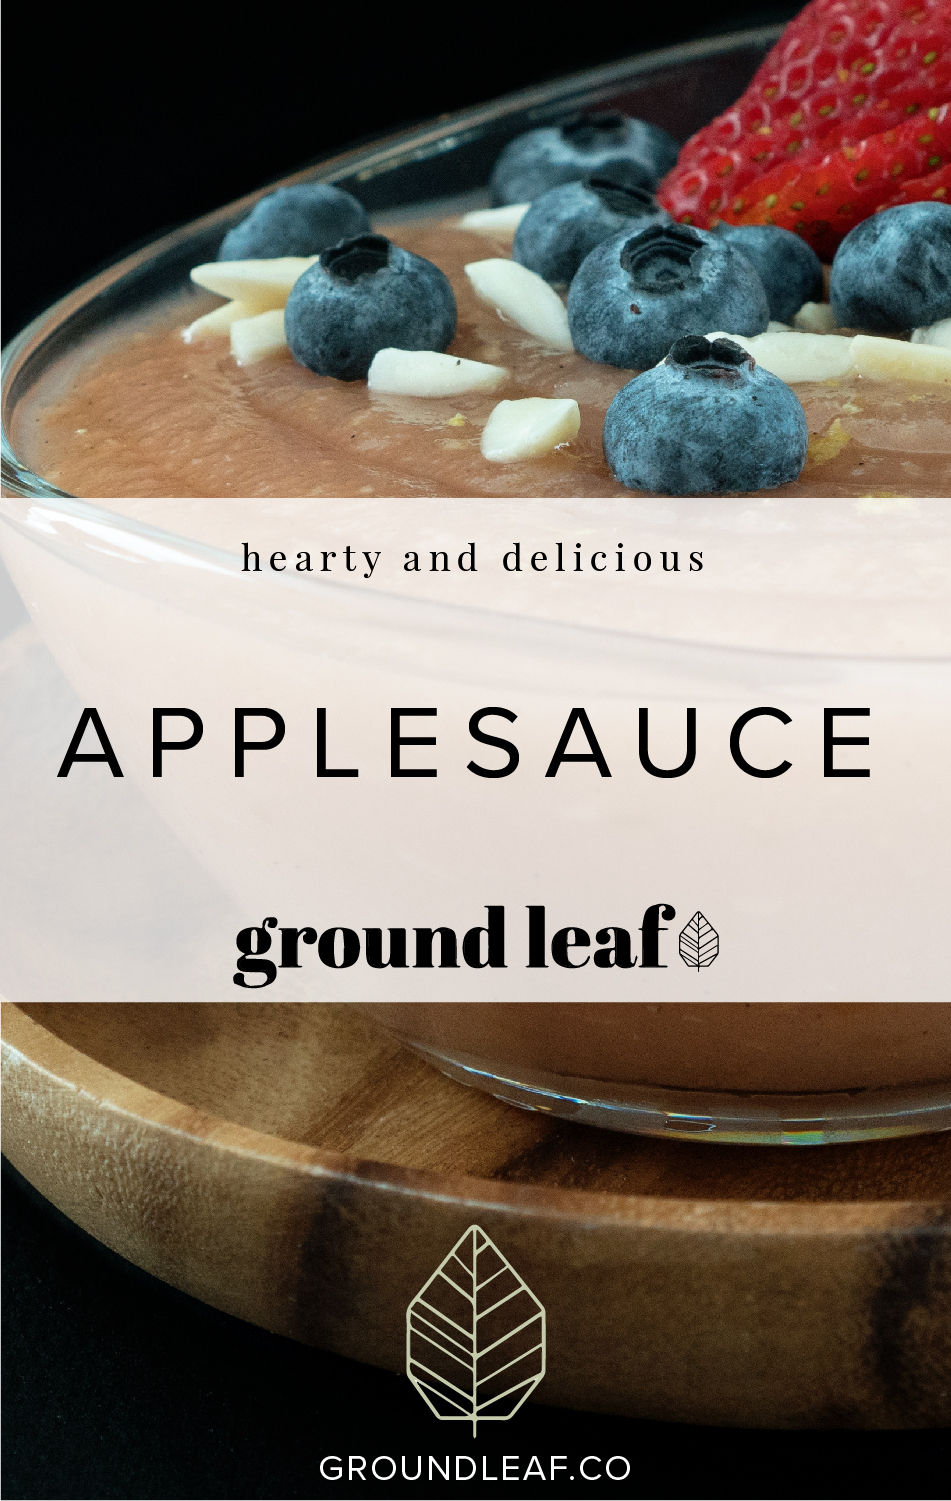 Delicious applesauce recipe by Groundleaf